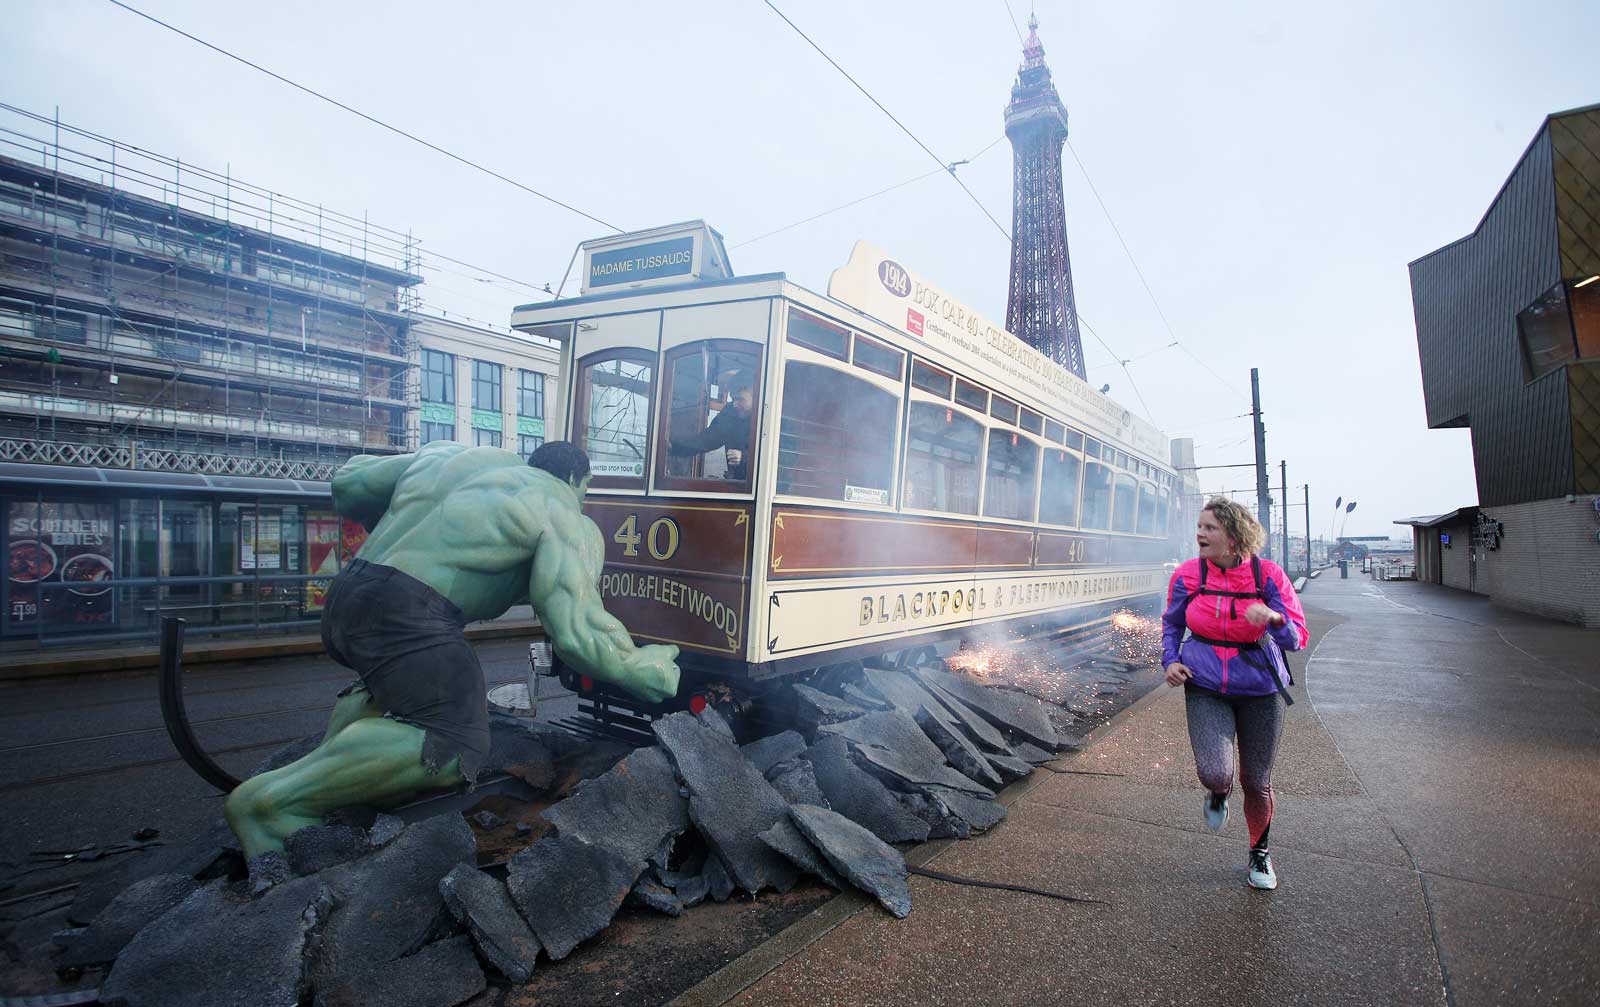 An early morning jogger gets a bit of a surprise as the Hulk takes on a Blackpool tram. Image: Madame Tussauds